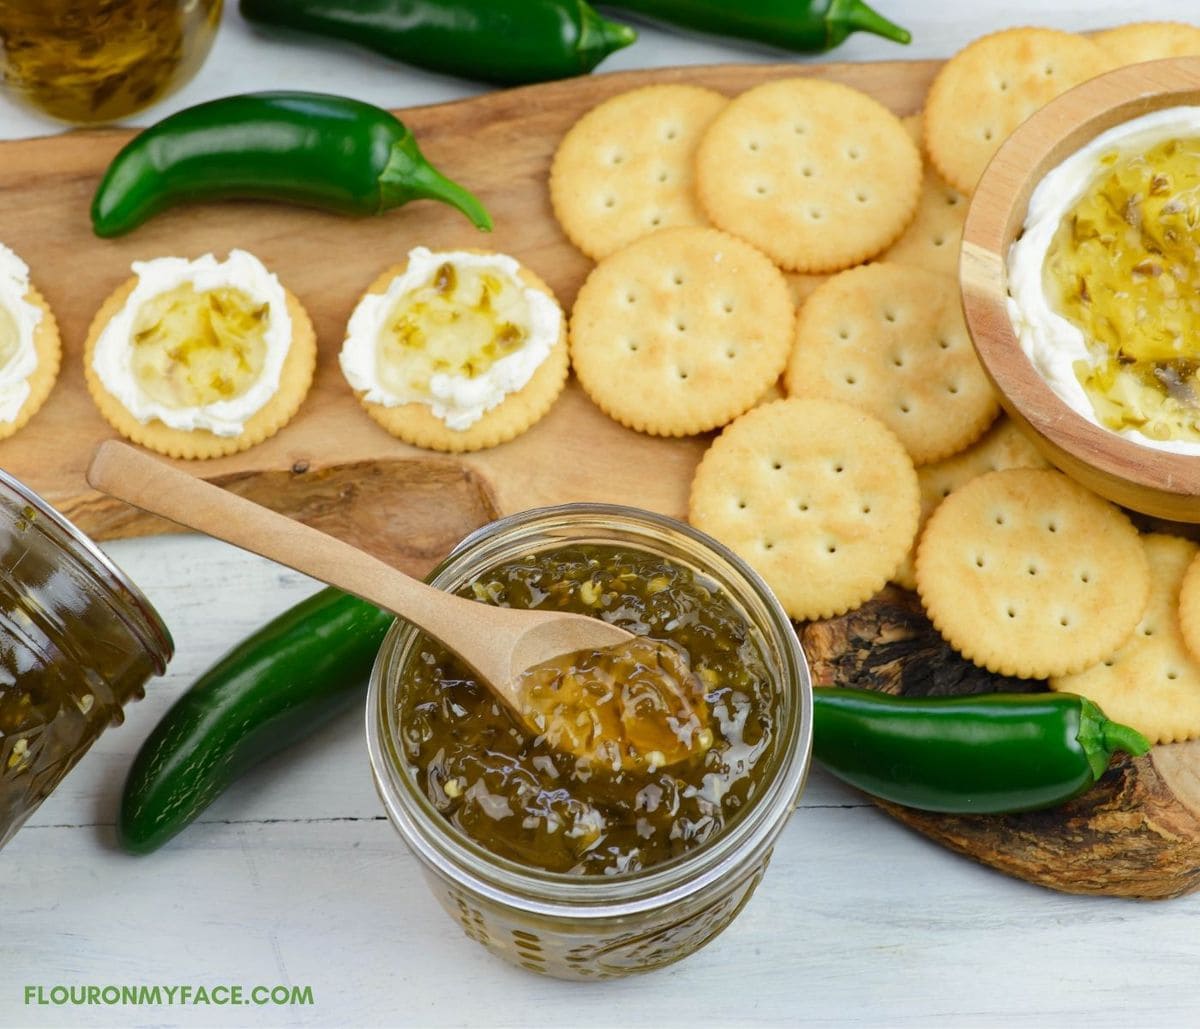 A opened jar of Jalapeno Jelly served with cream cheese and crackers.